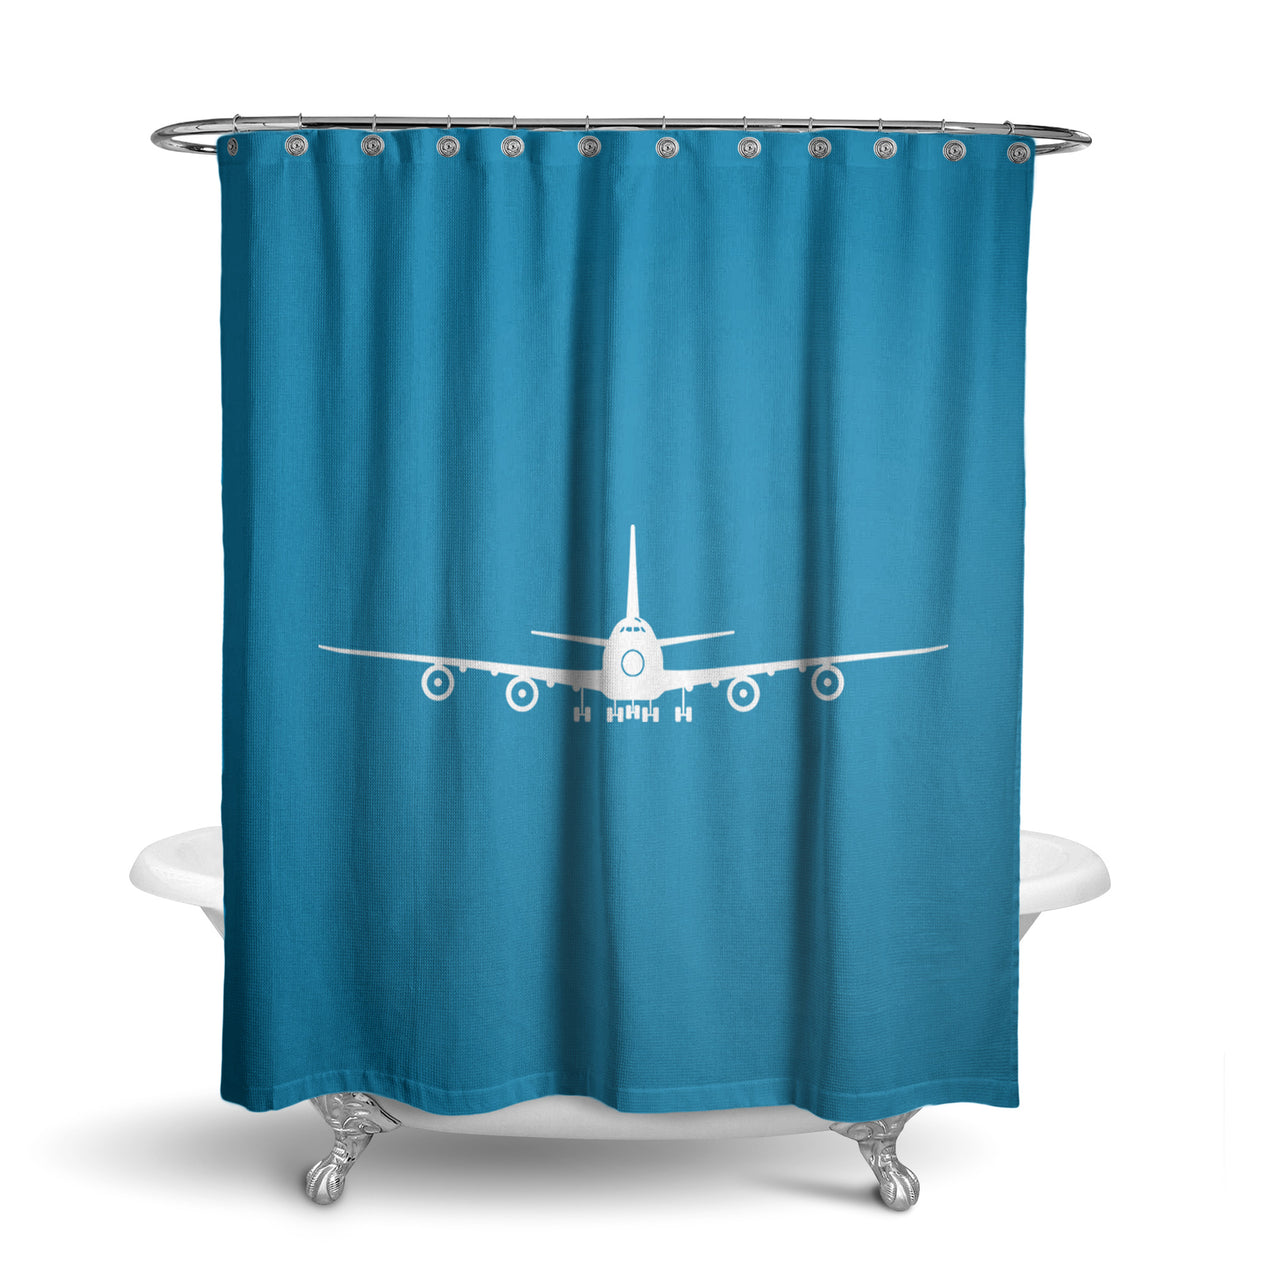 Boeing 747 Silhouette Designed Shower Curtains